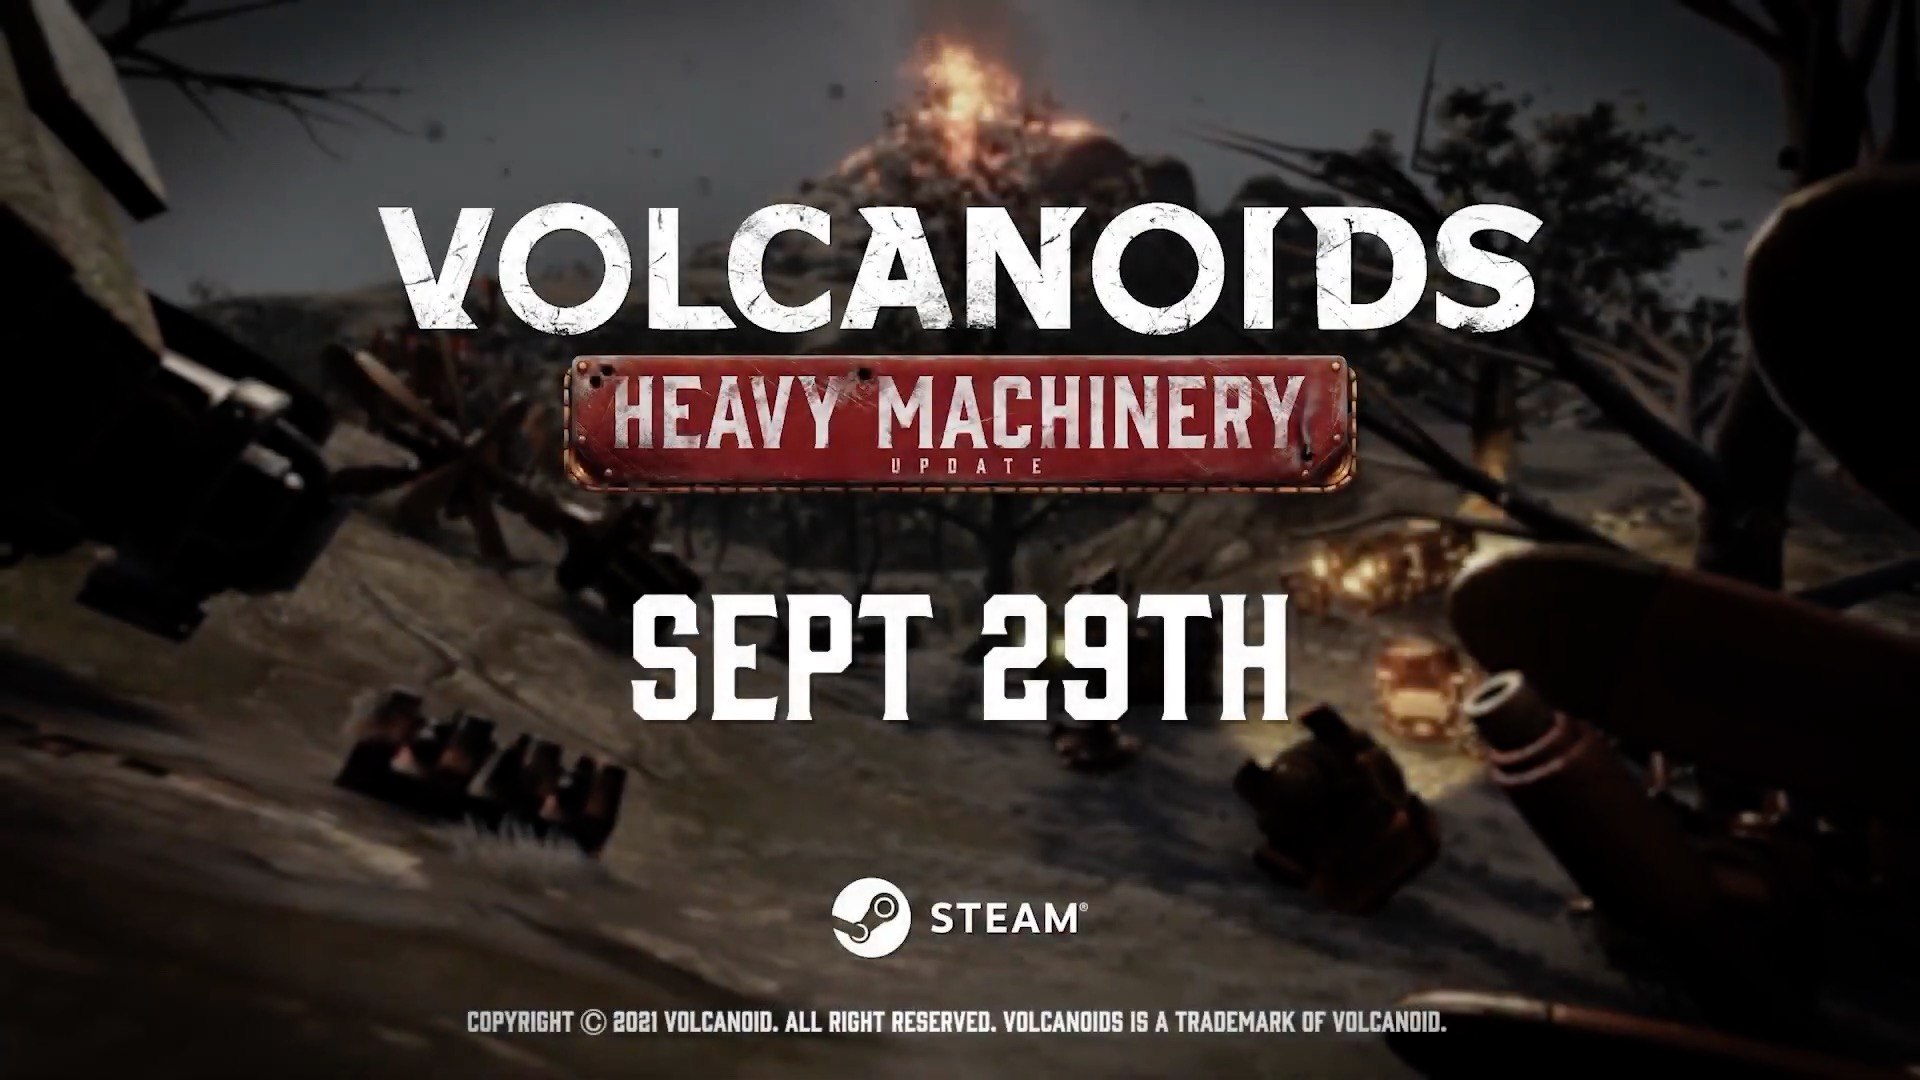 Volcanoids Official Heavy Machinery Update Trailer - video Dailymotion